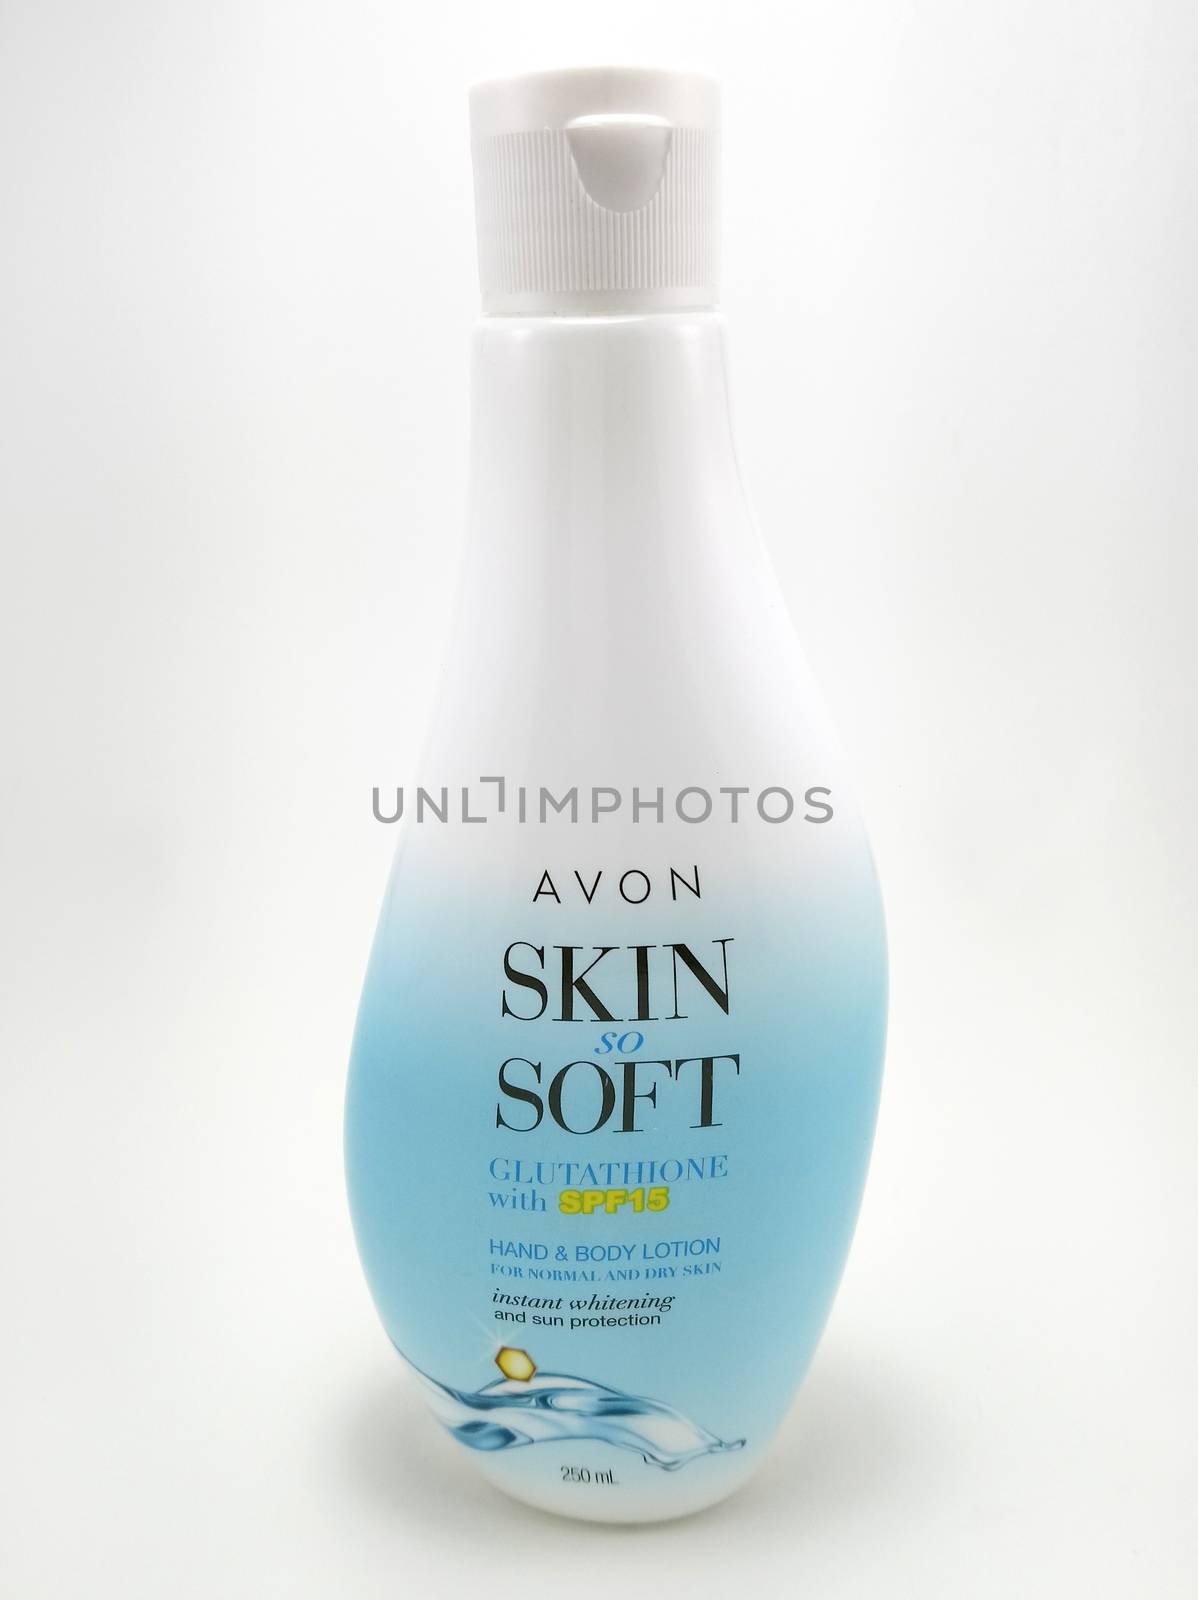 Avon skin so soft hand and body lotion in Manila, Philippines by imwaltersy